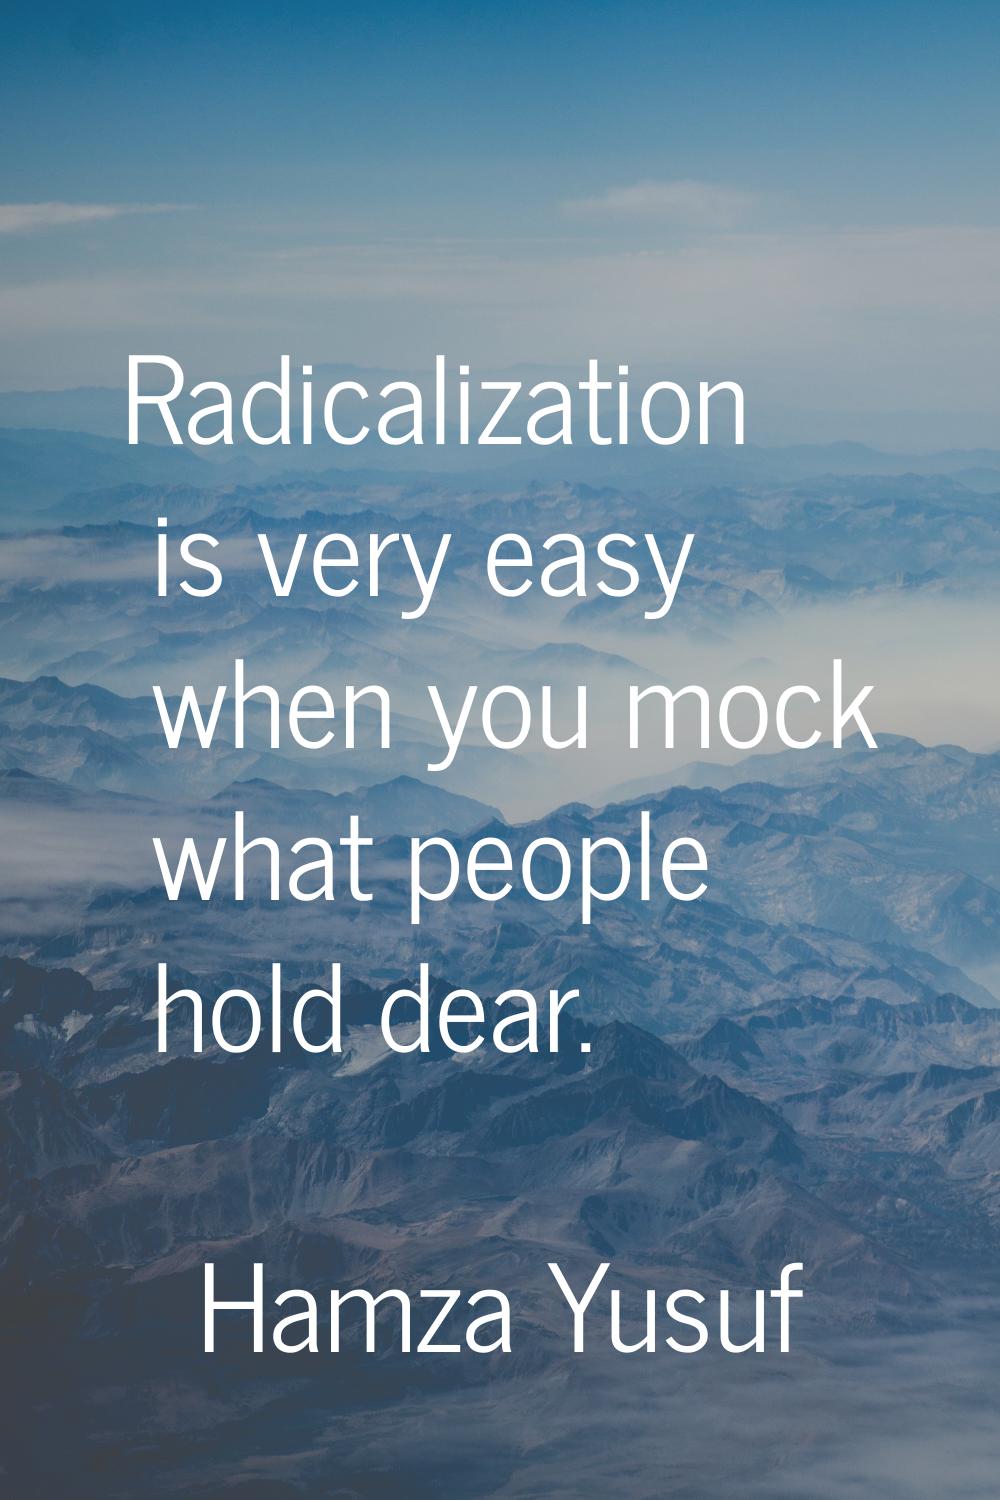 Radicalization is very easy when you mock what people hold dear.